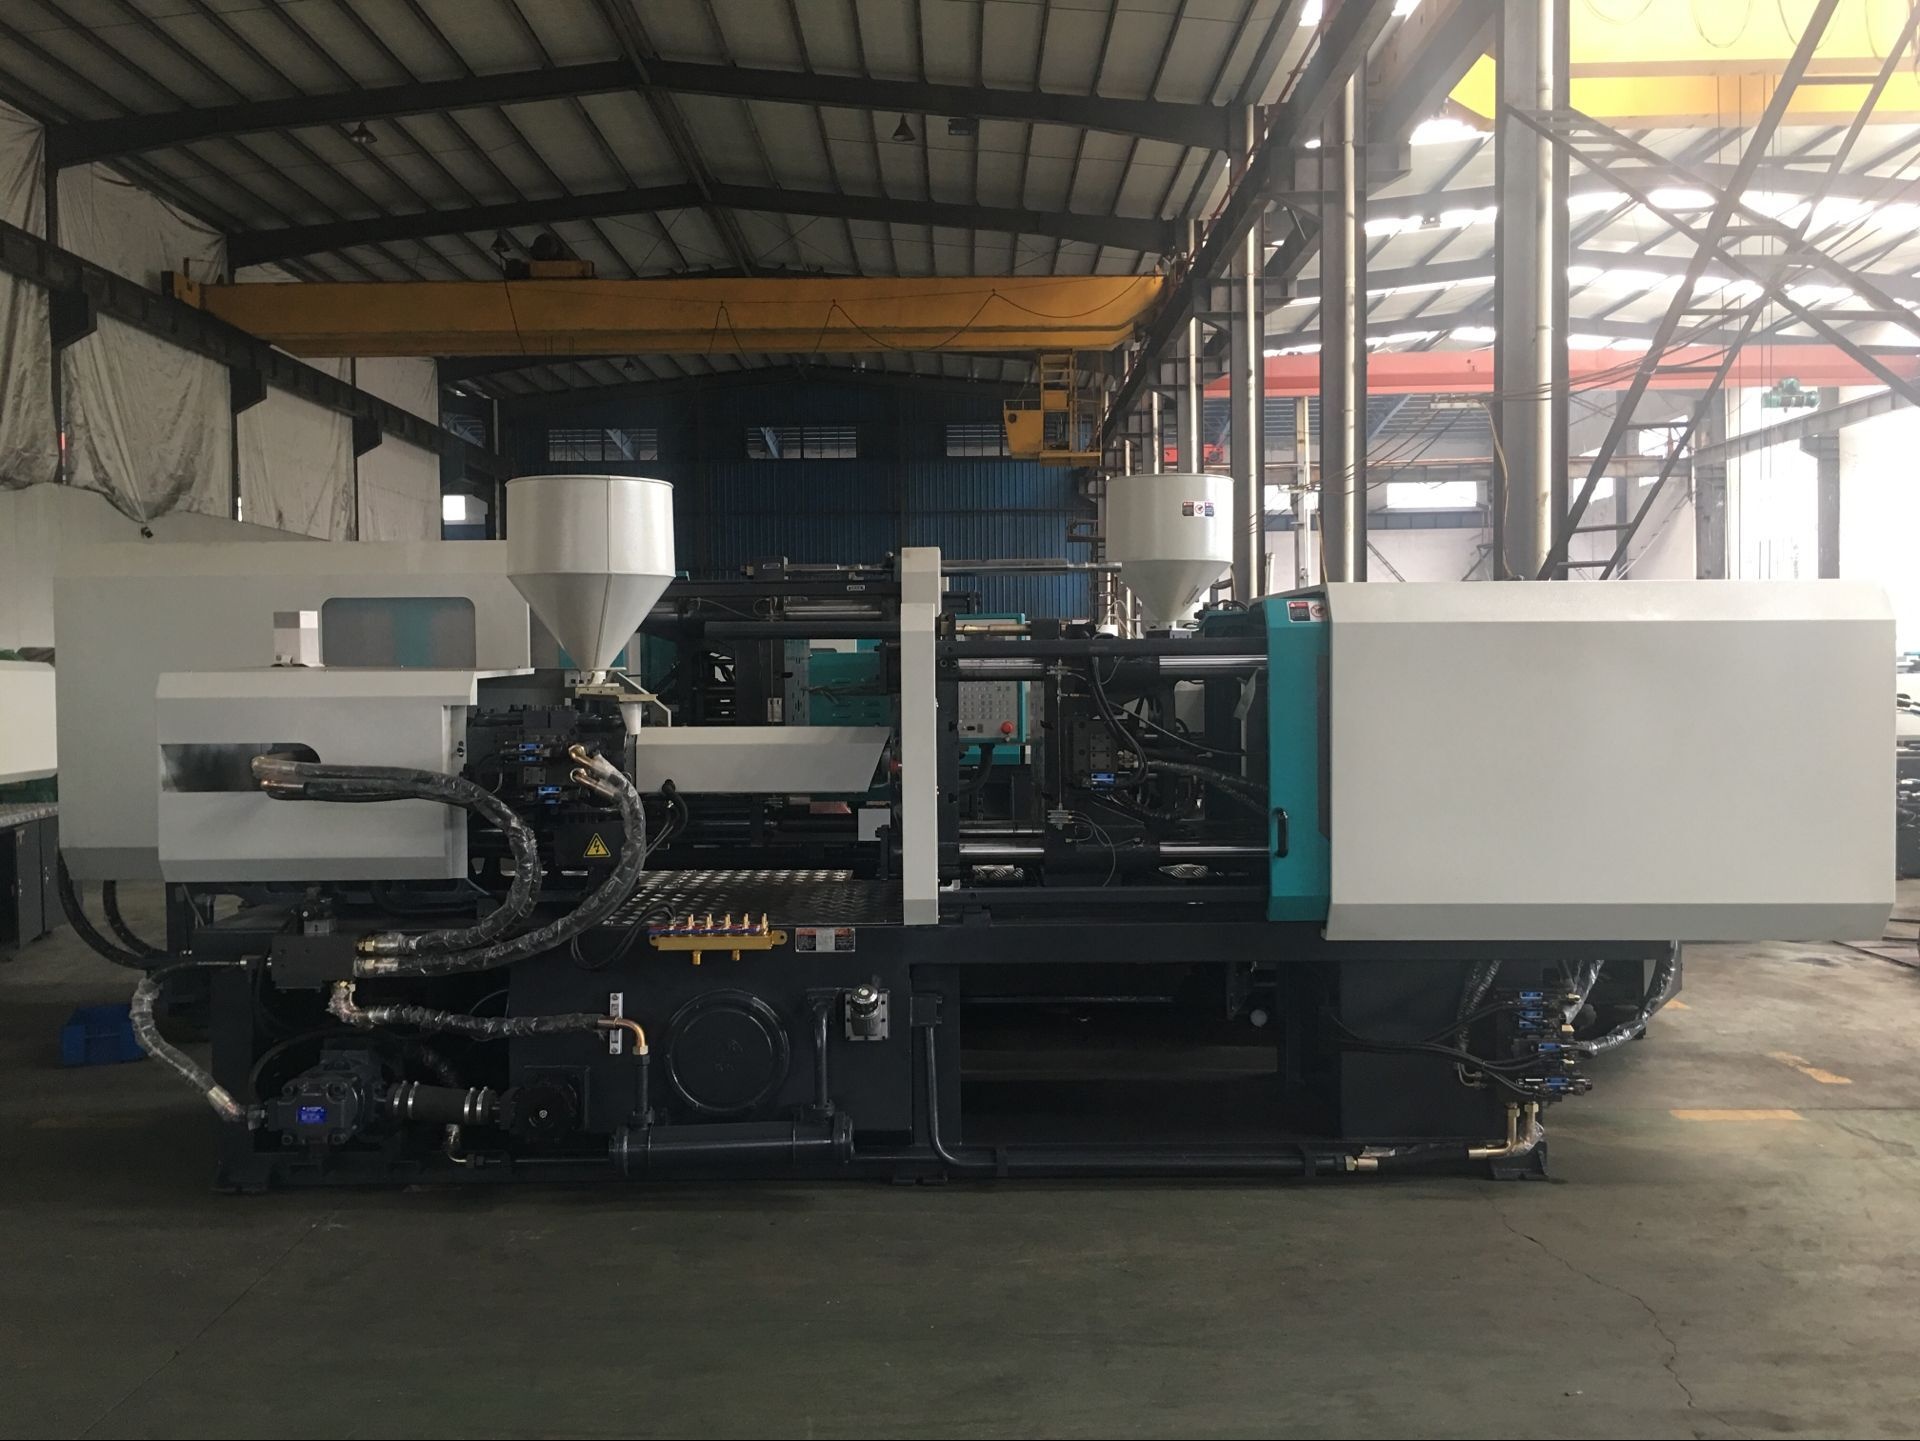 Used Nissei Injection Molding Machines